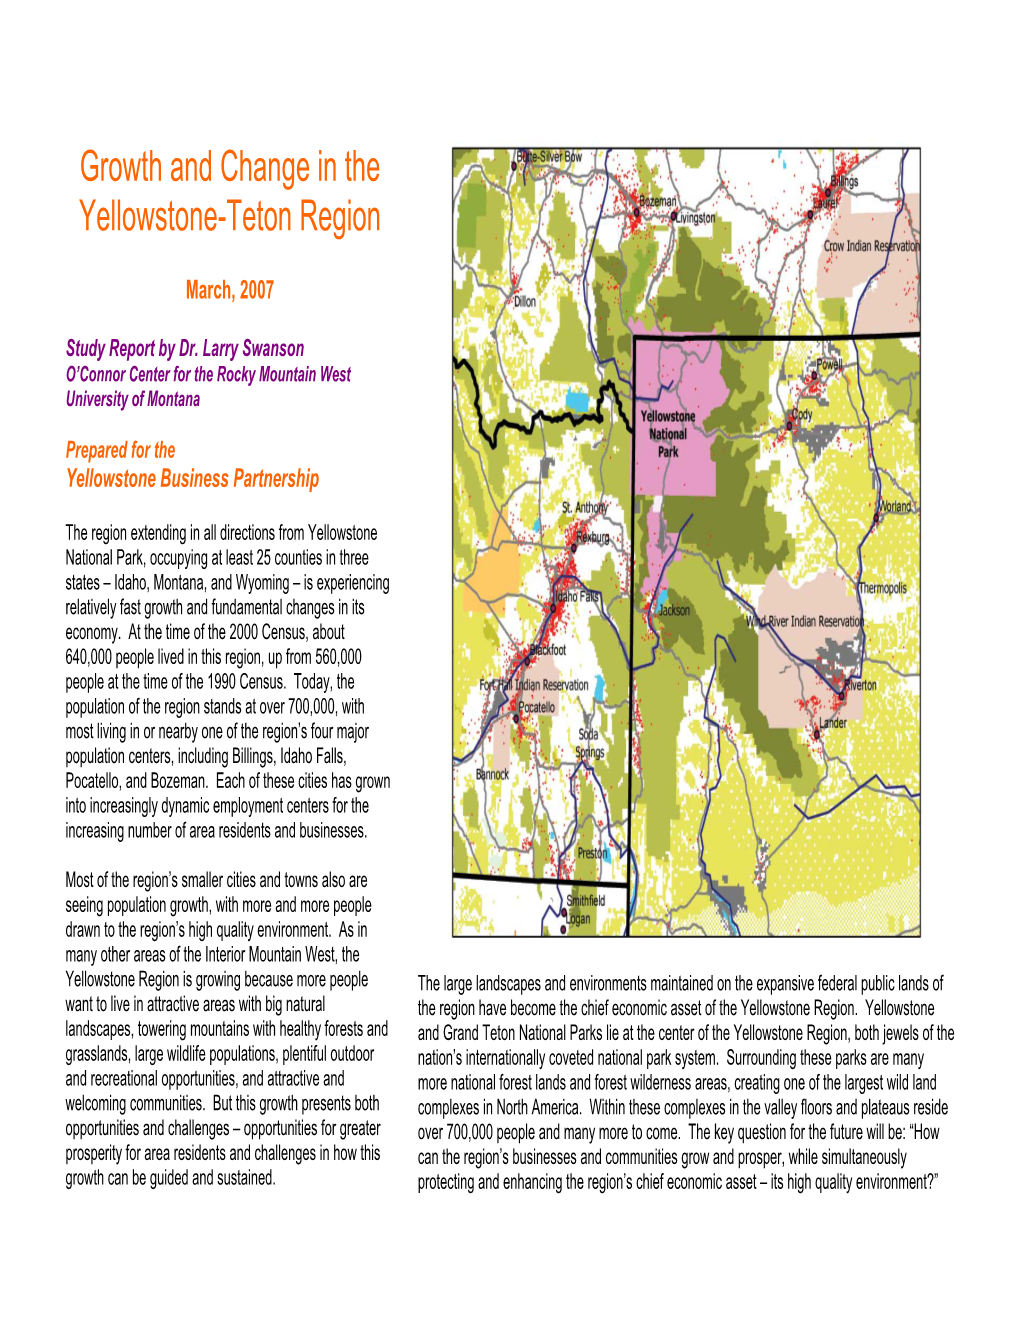 Growth and Change in the Yellowstone-Teton Region